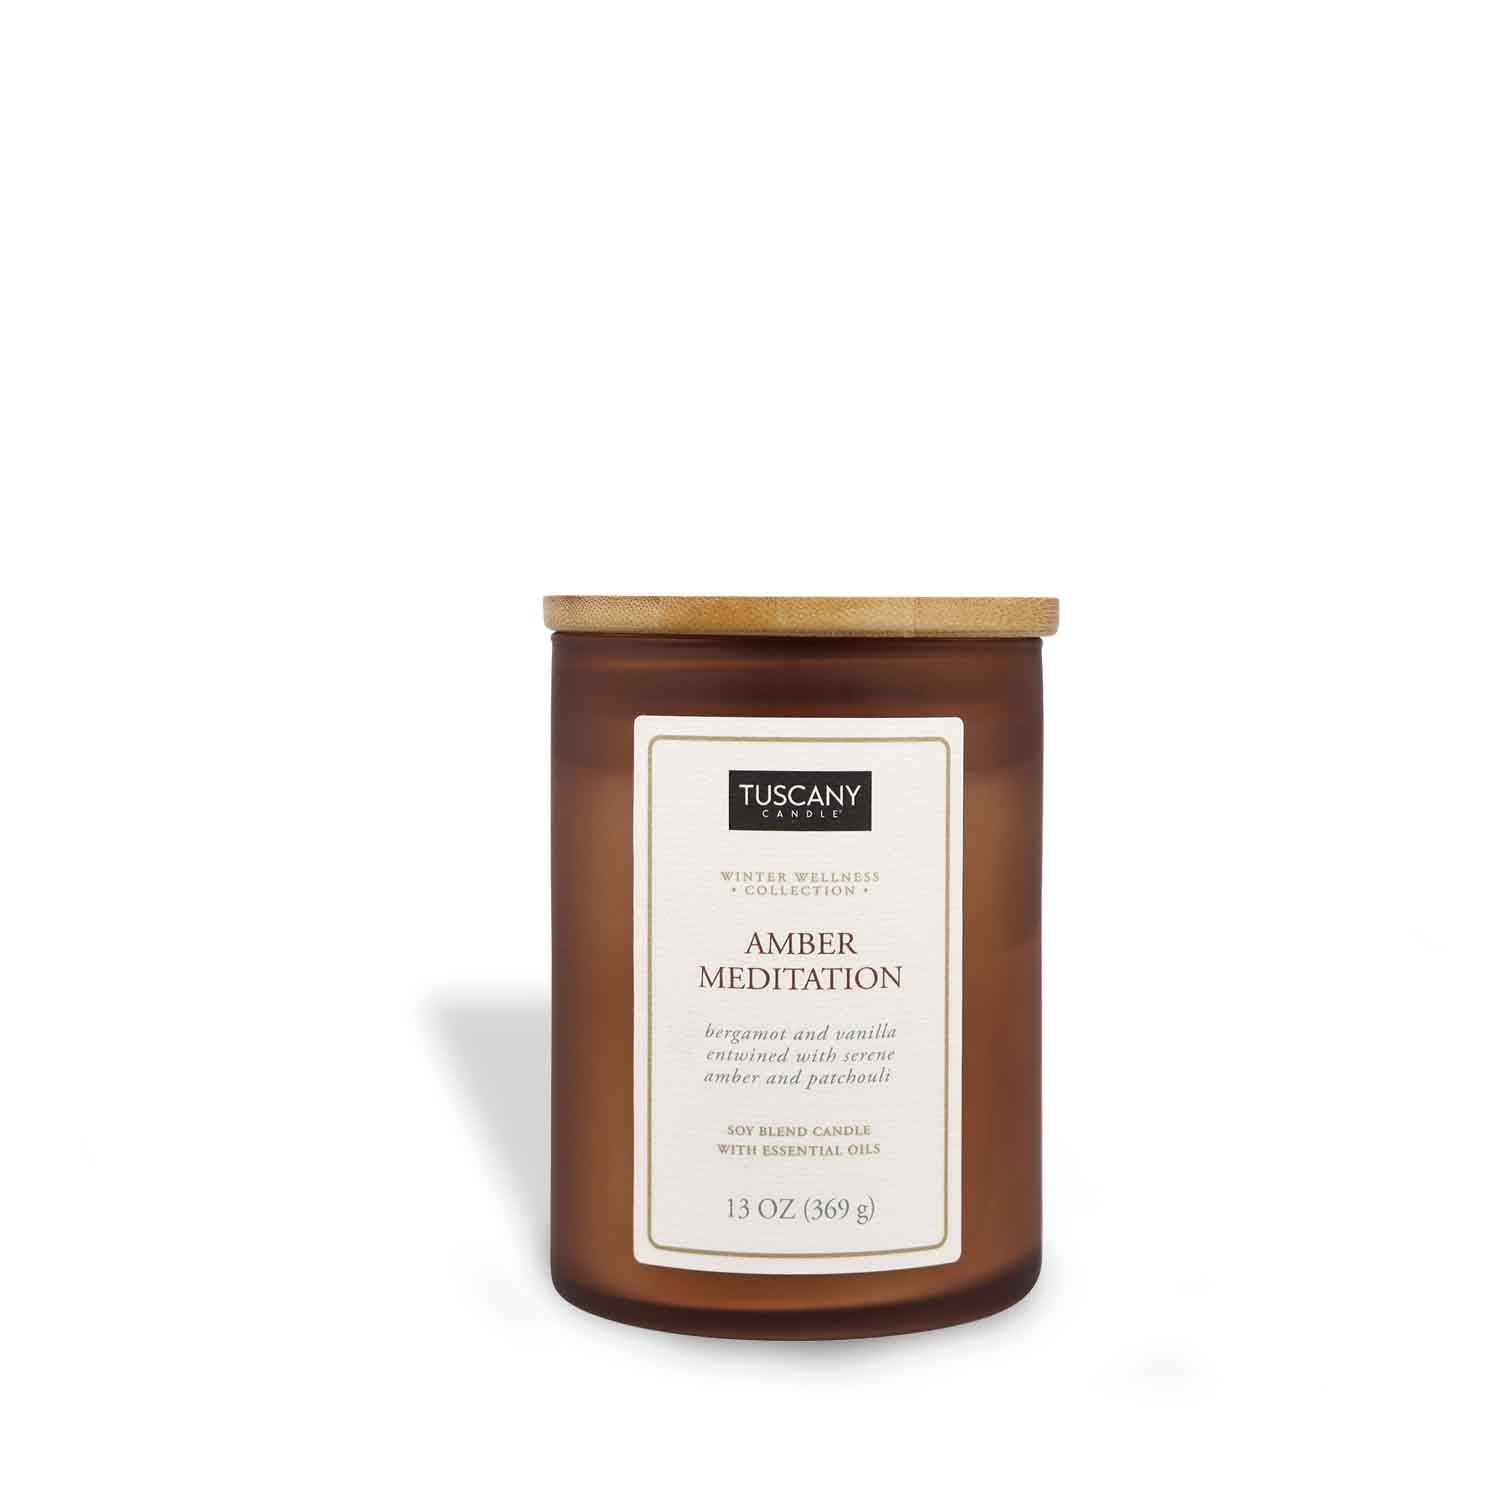 A Tuscany Candle Amber Meditation Scented Jar Candle (13 oz) – Winter Wellness Collection with a brown lid on a white background.